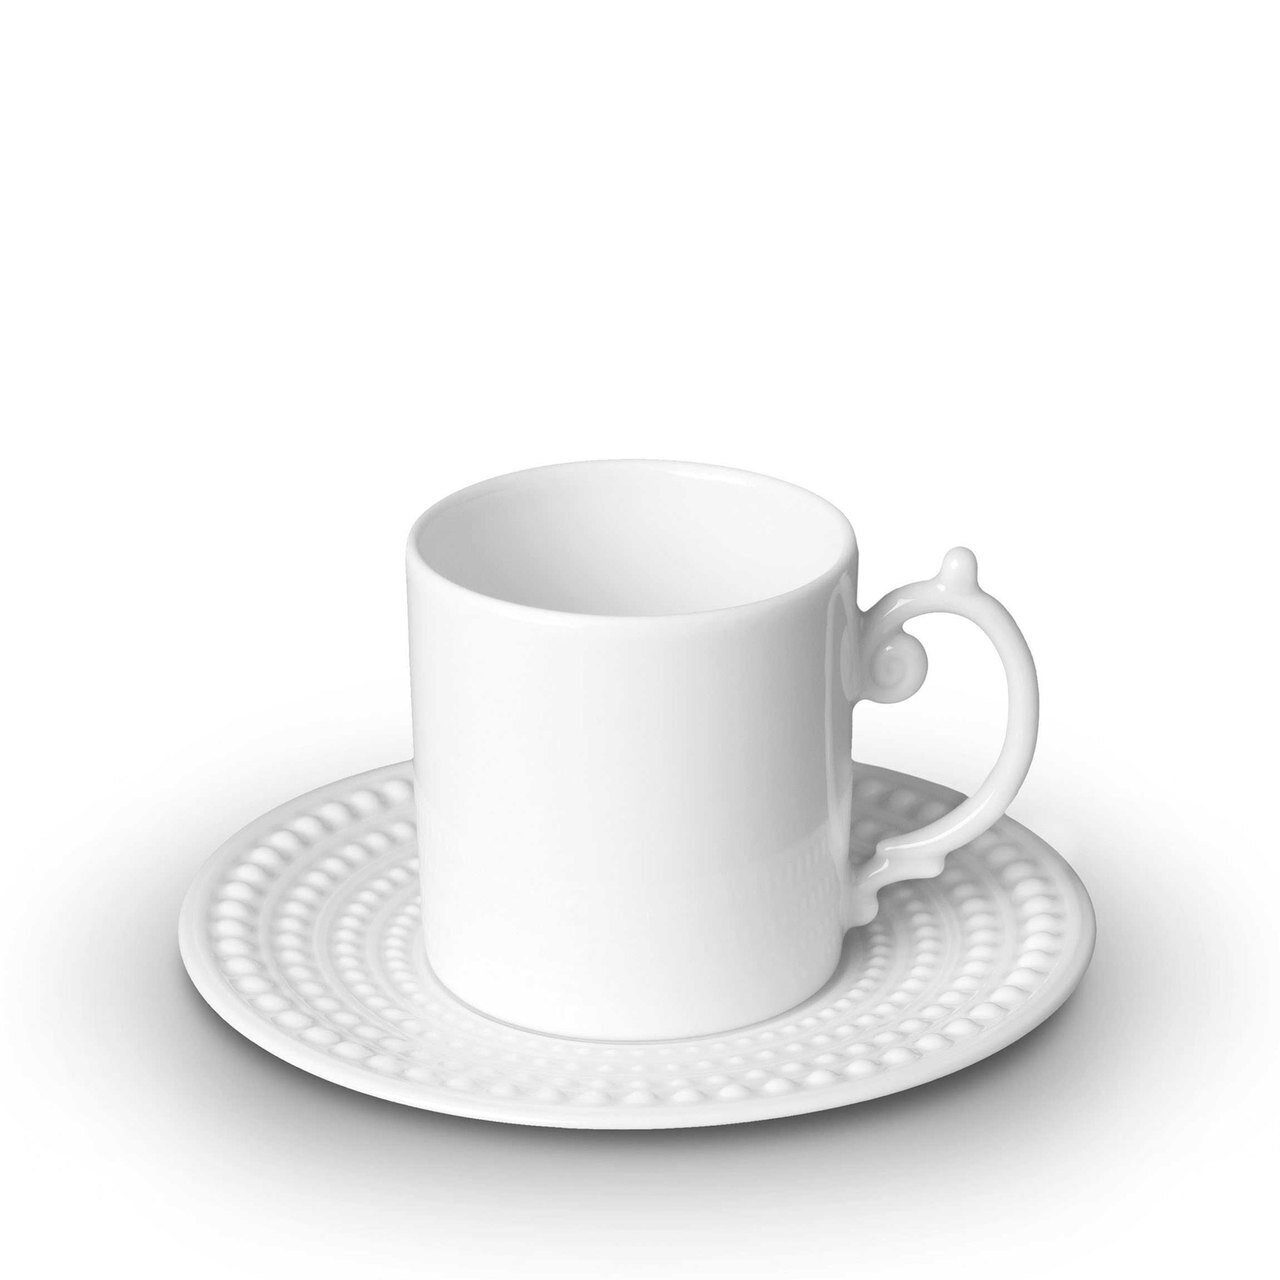 L'Objet Perlee Espresso Cup and Saucer White